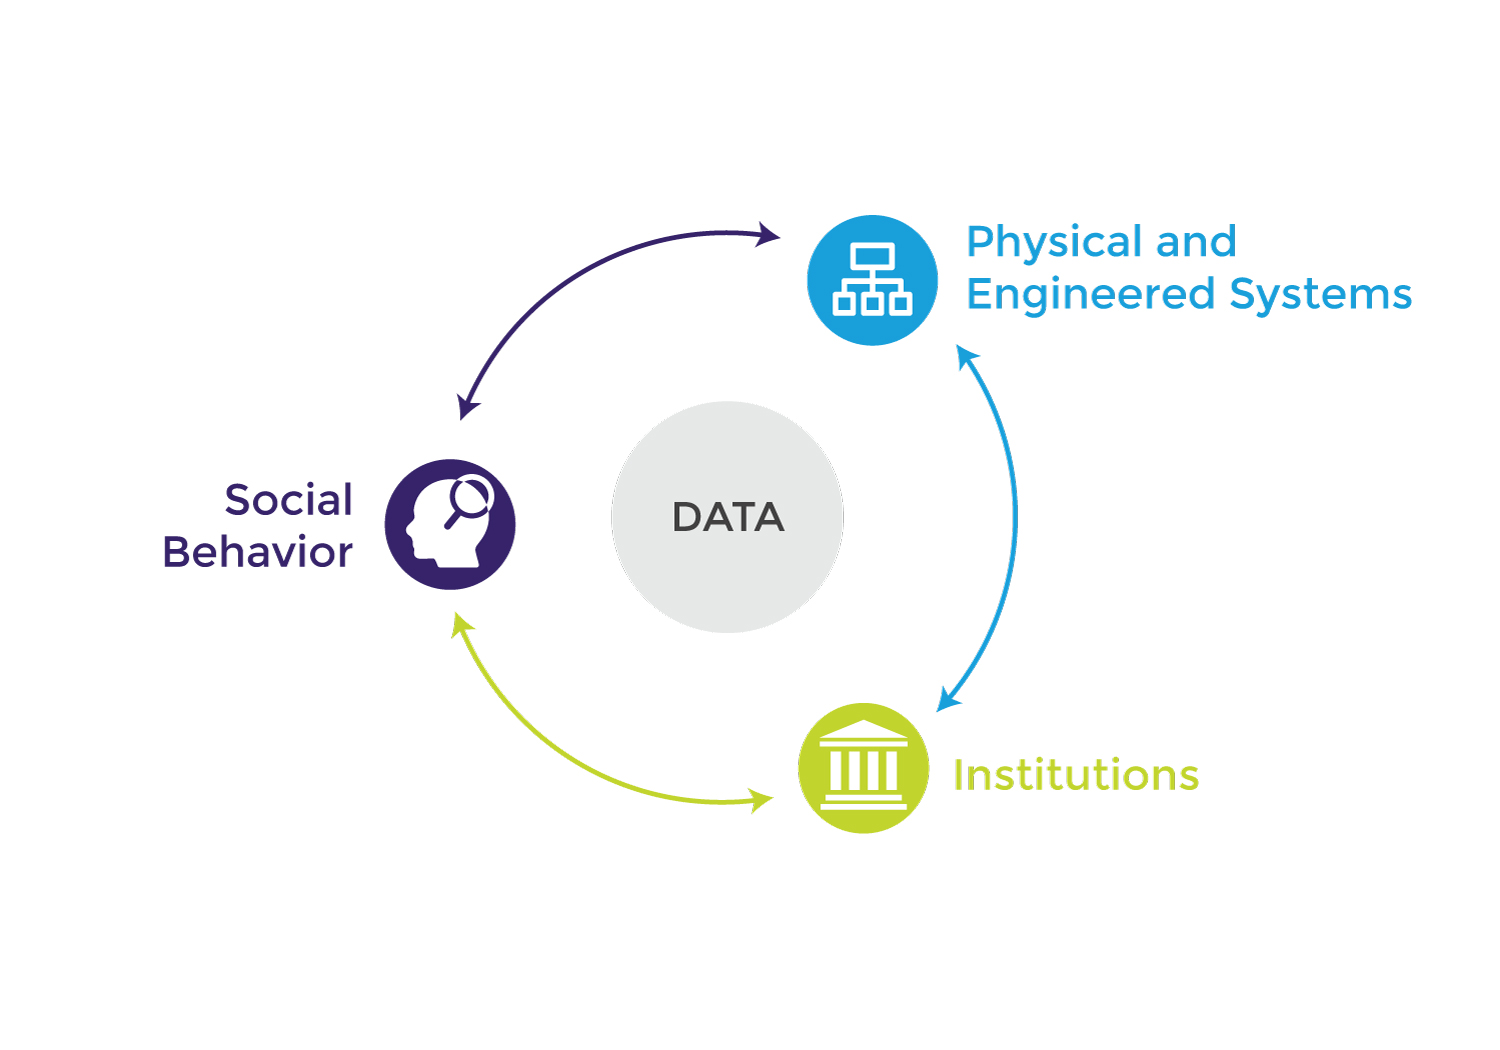 graphic showing data at the center of social behavior, institutions, and physical/engineered systems